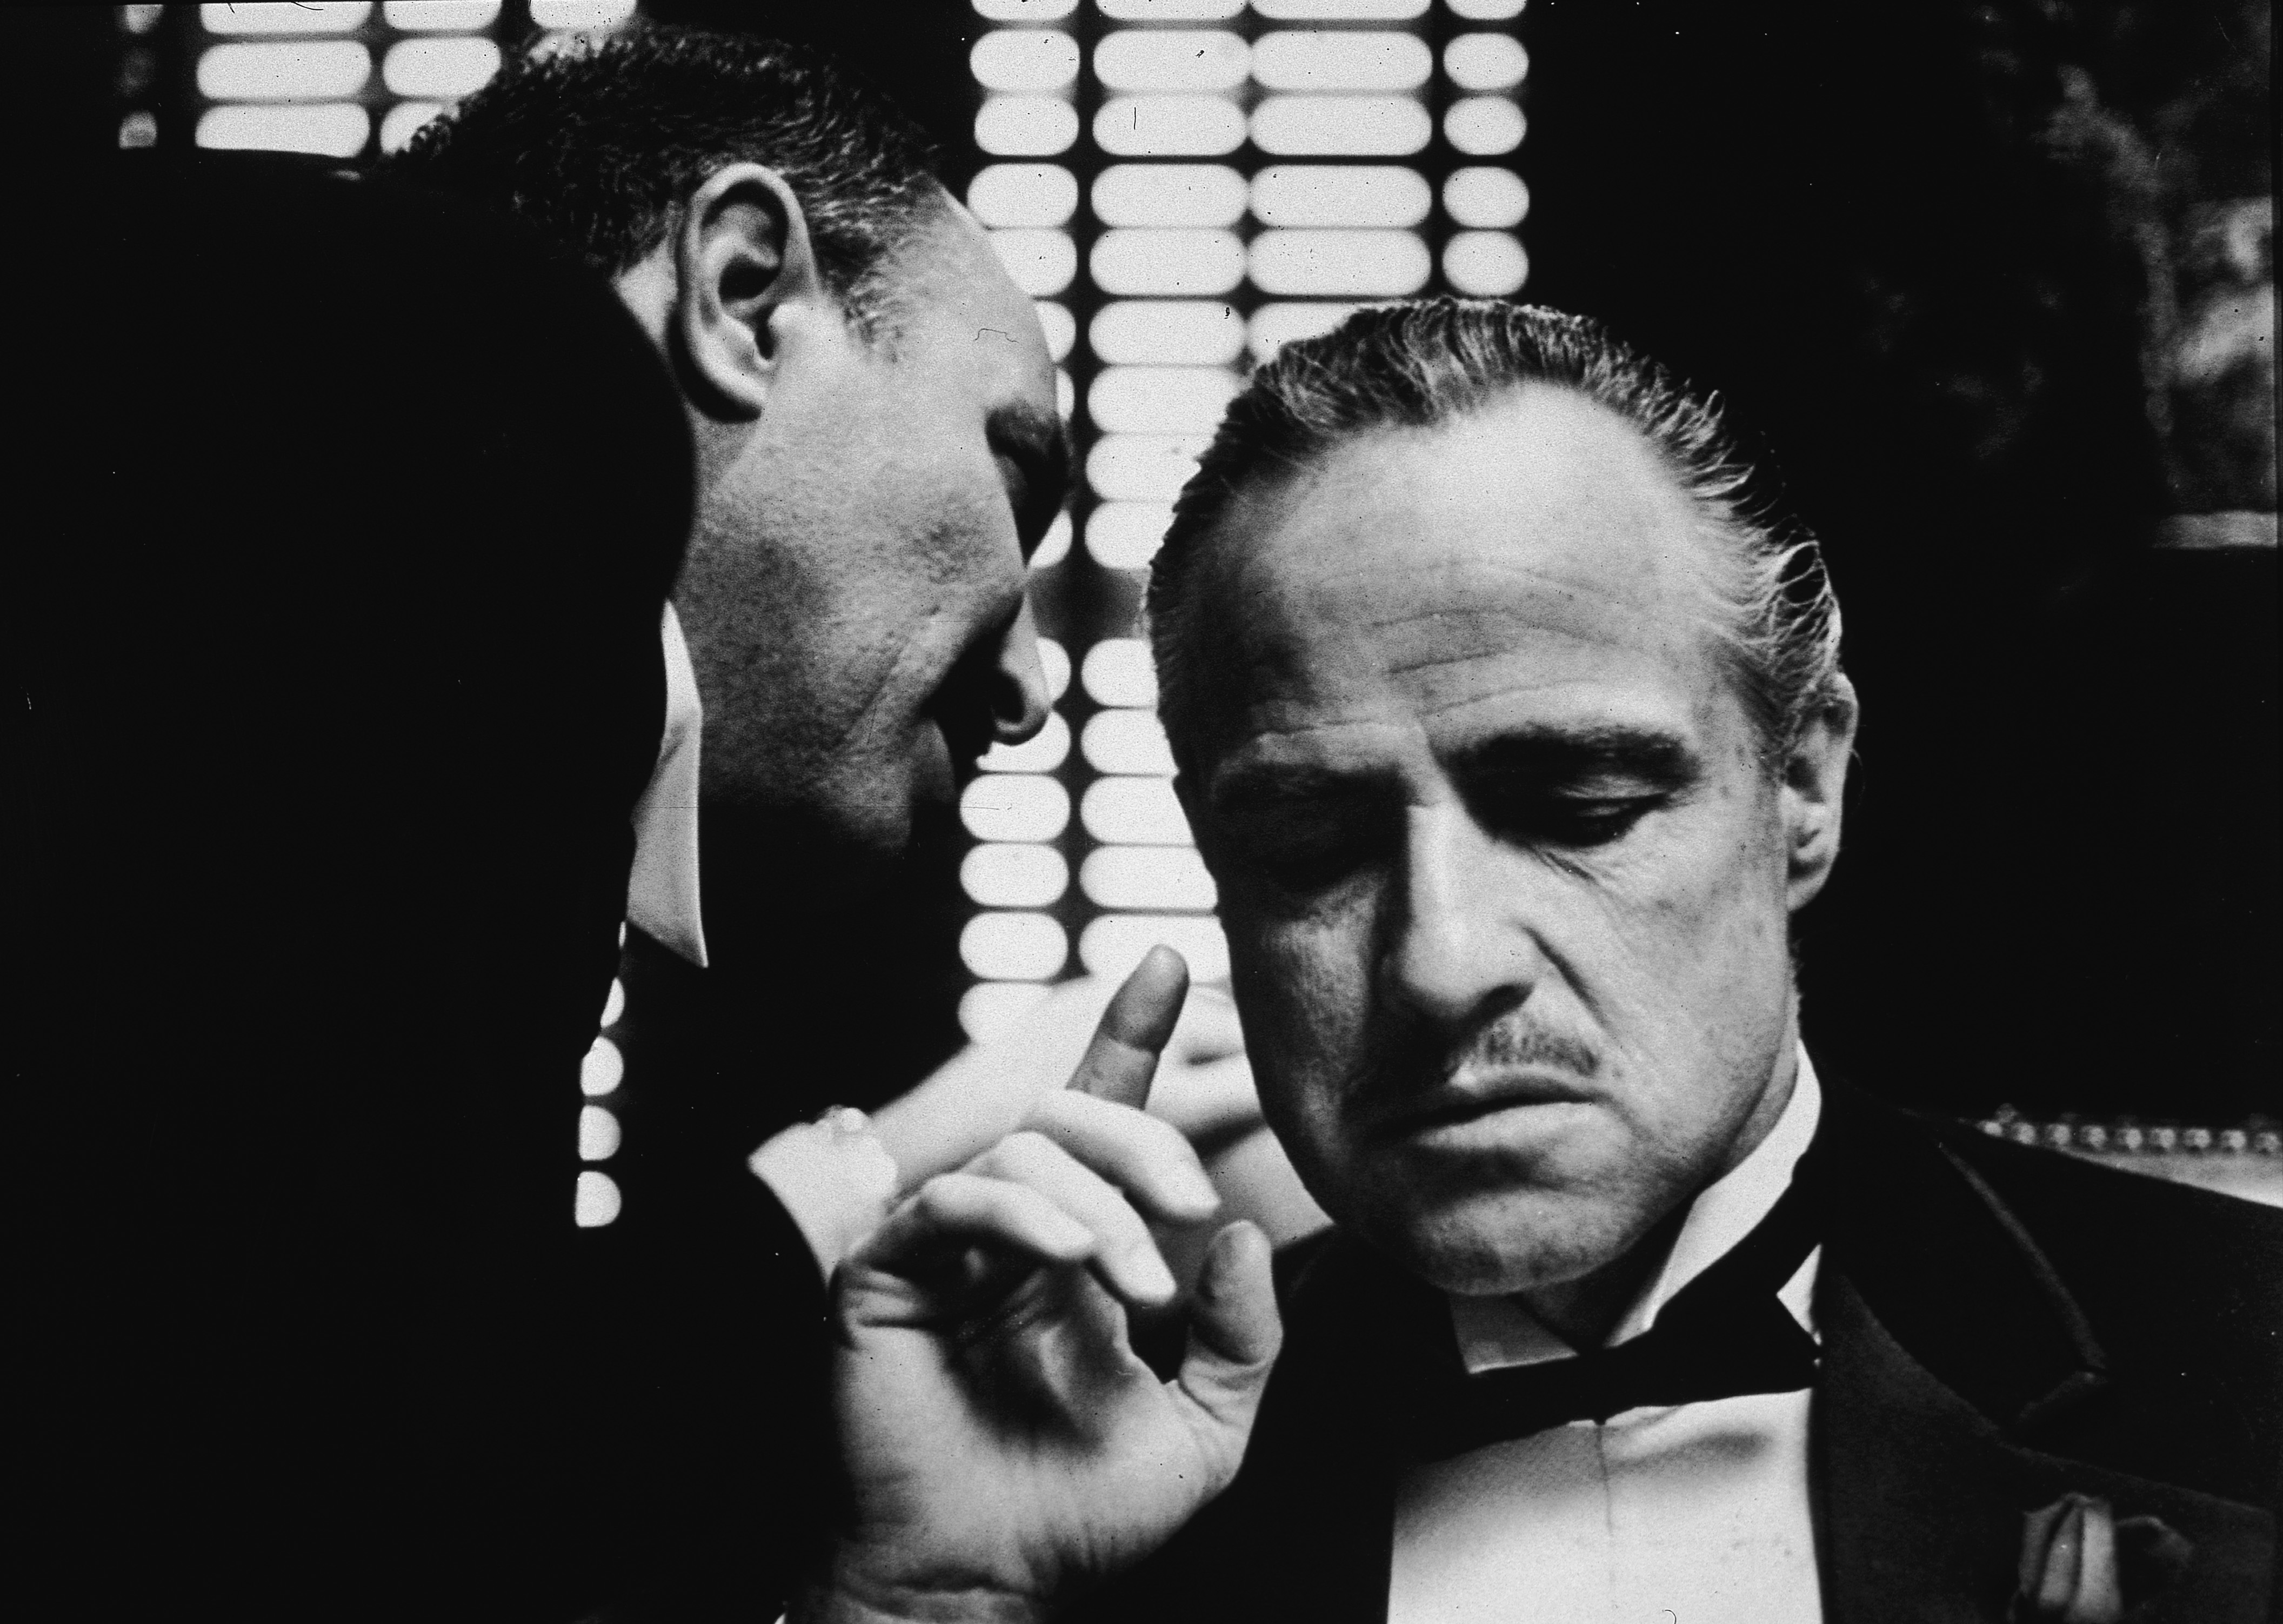 American actor Marlon Brando listens as an unidentified actor speaks close to one ear in a still from the film, 'The Godfather,' directed by Francis Coppola, 1972 (Paramount Pictures&mdash;Getty Images)